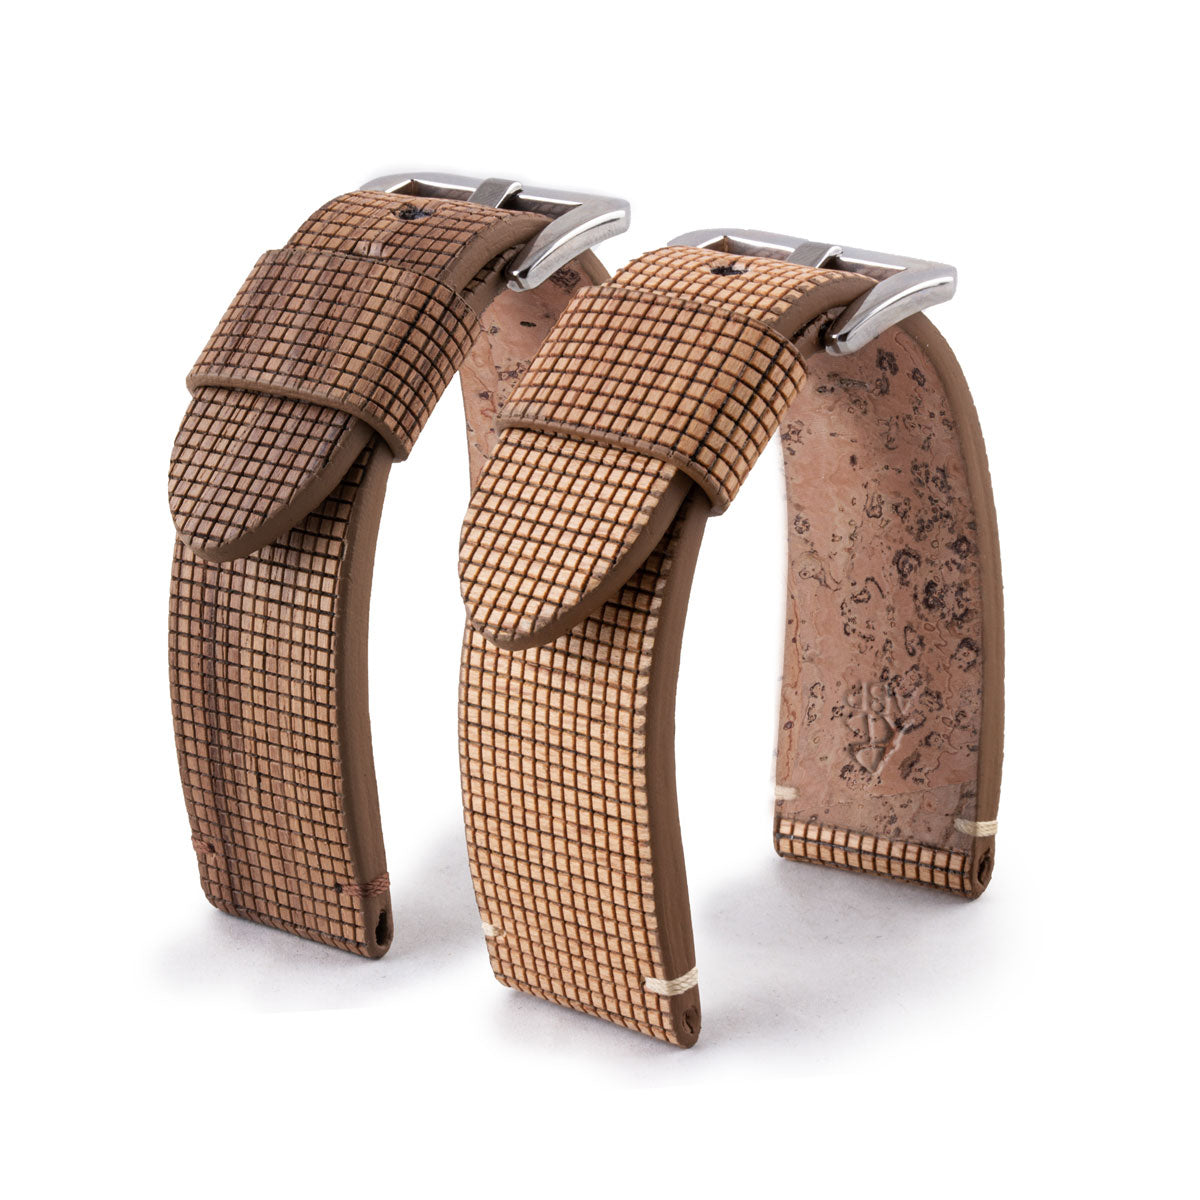 Eco-friendly watch strap for Panerai watches - NUO Melamine Wooden sheet